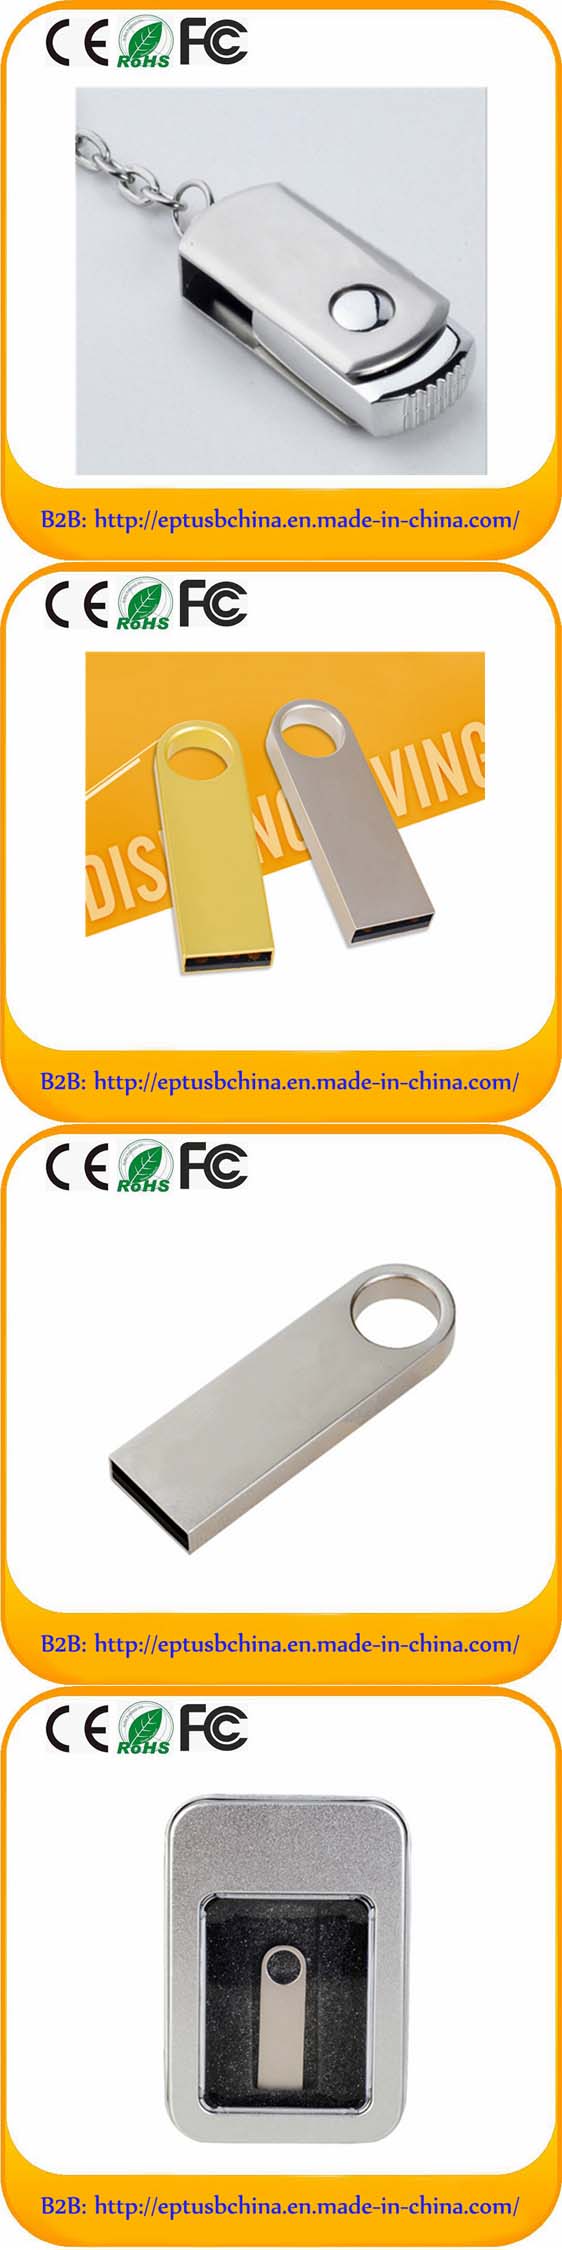 Mini USB with Water Proof USB Chips Flash Drive (ED003)